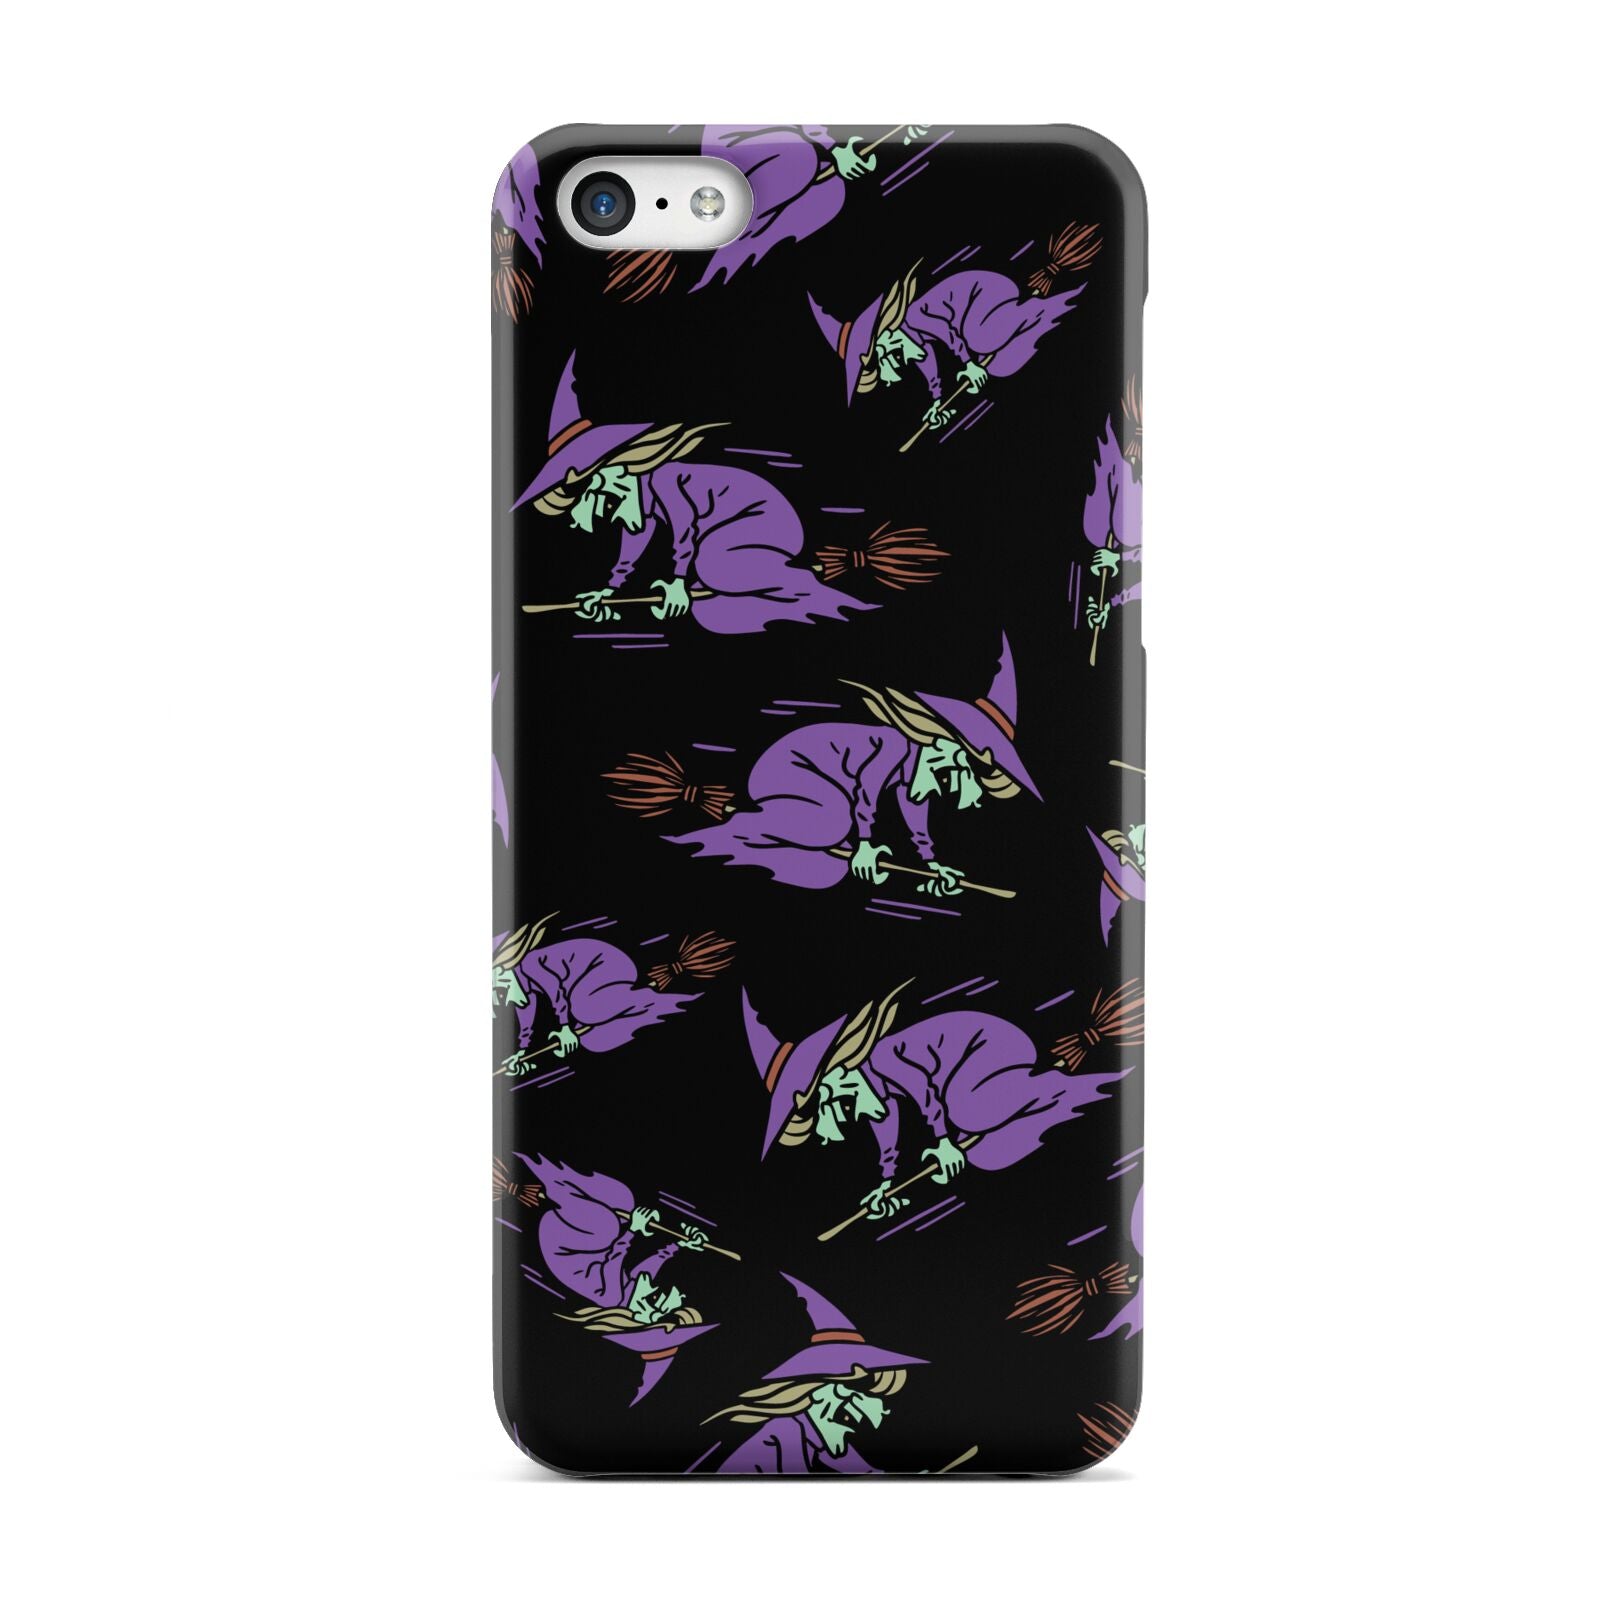 Flying Witches Apple iPhone 5c Case